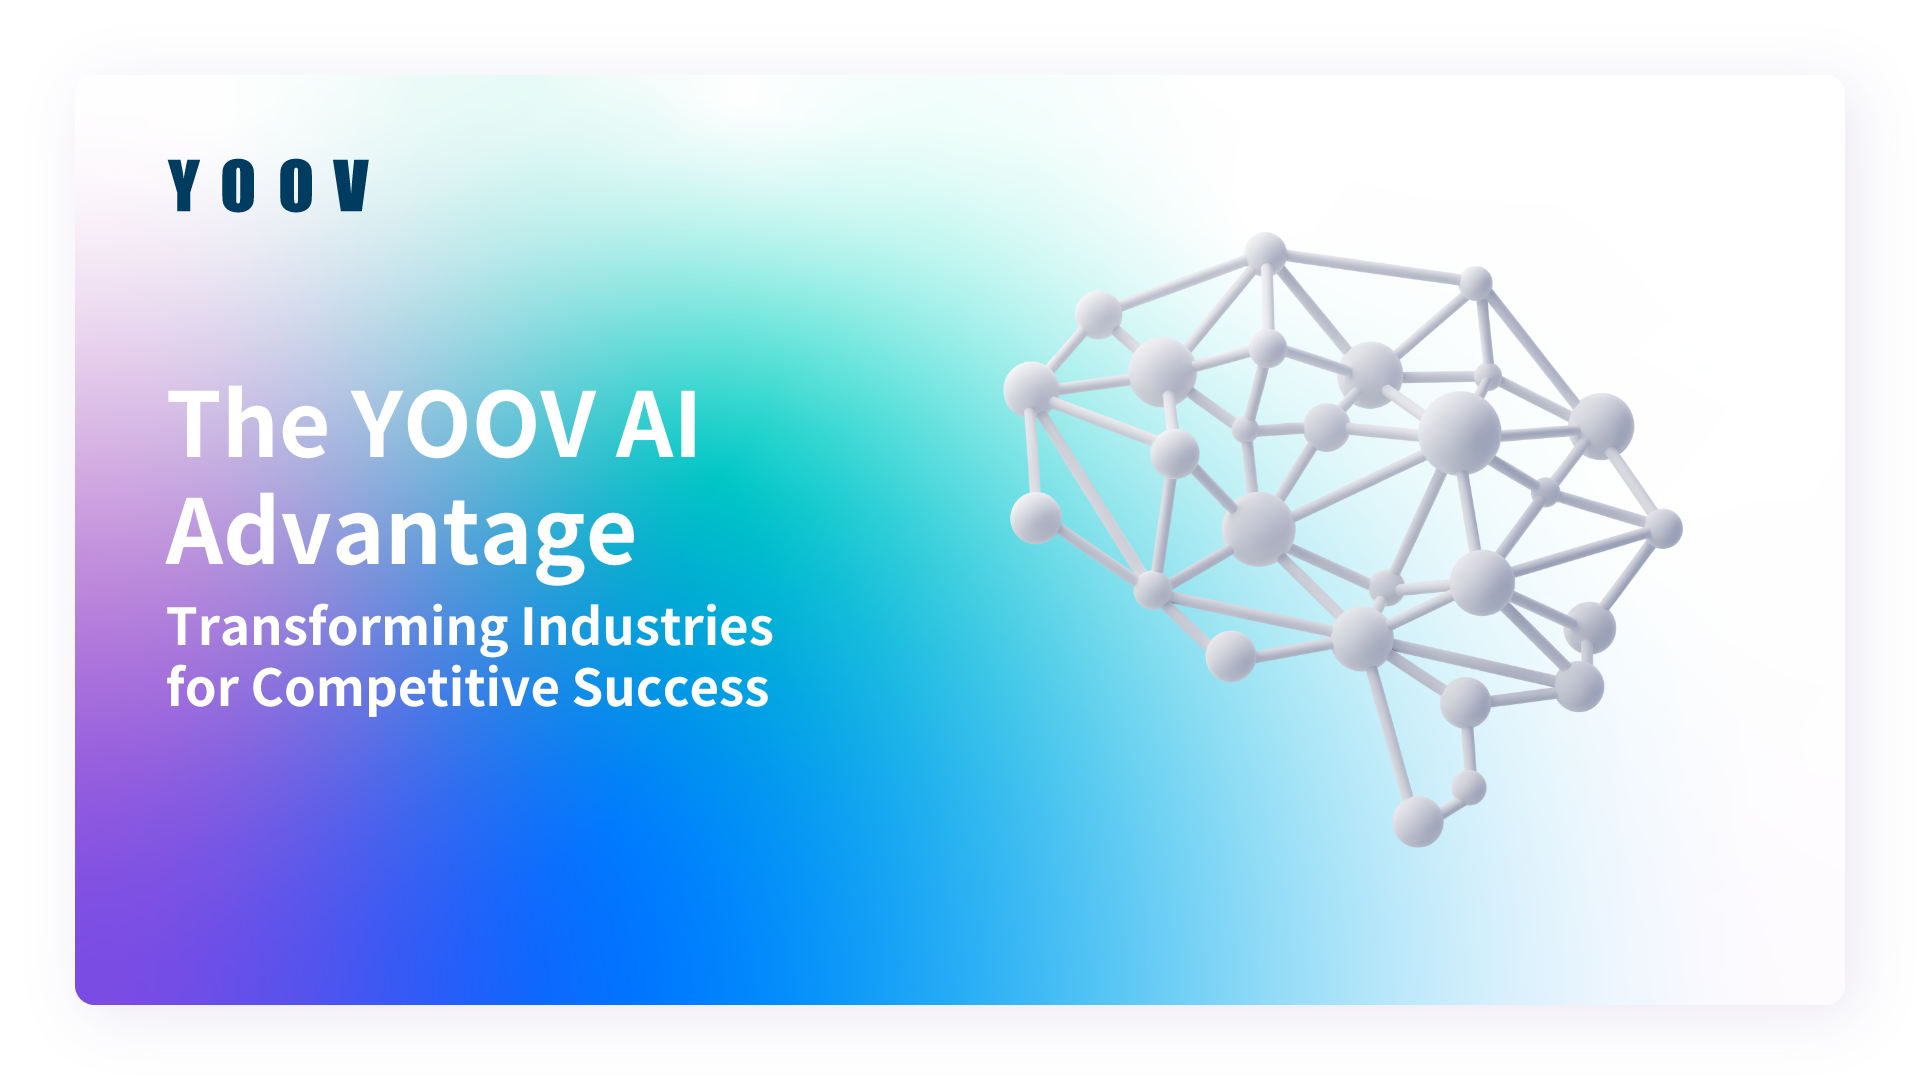 The YOOV AI Advantage: Transforming Industries for Competitive Success